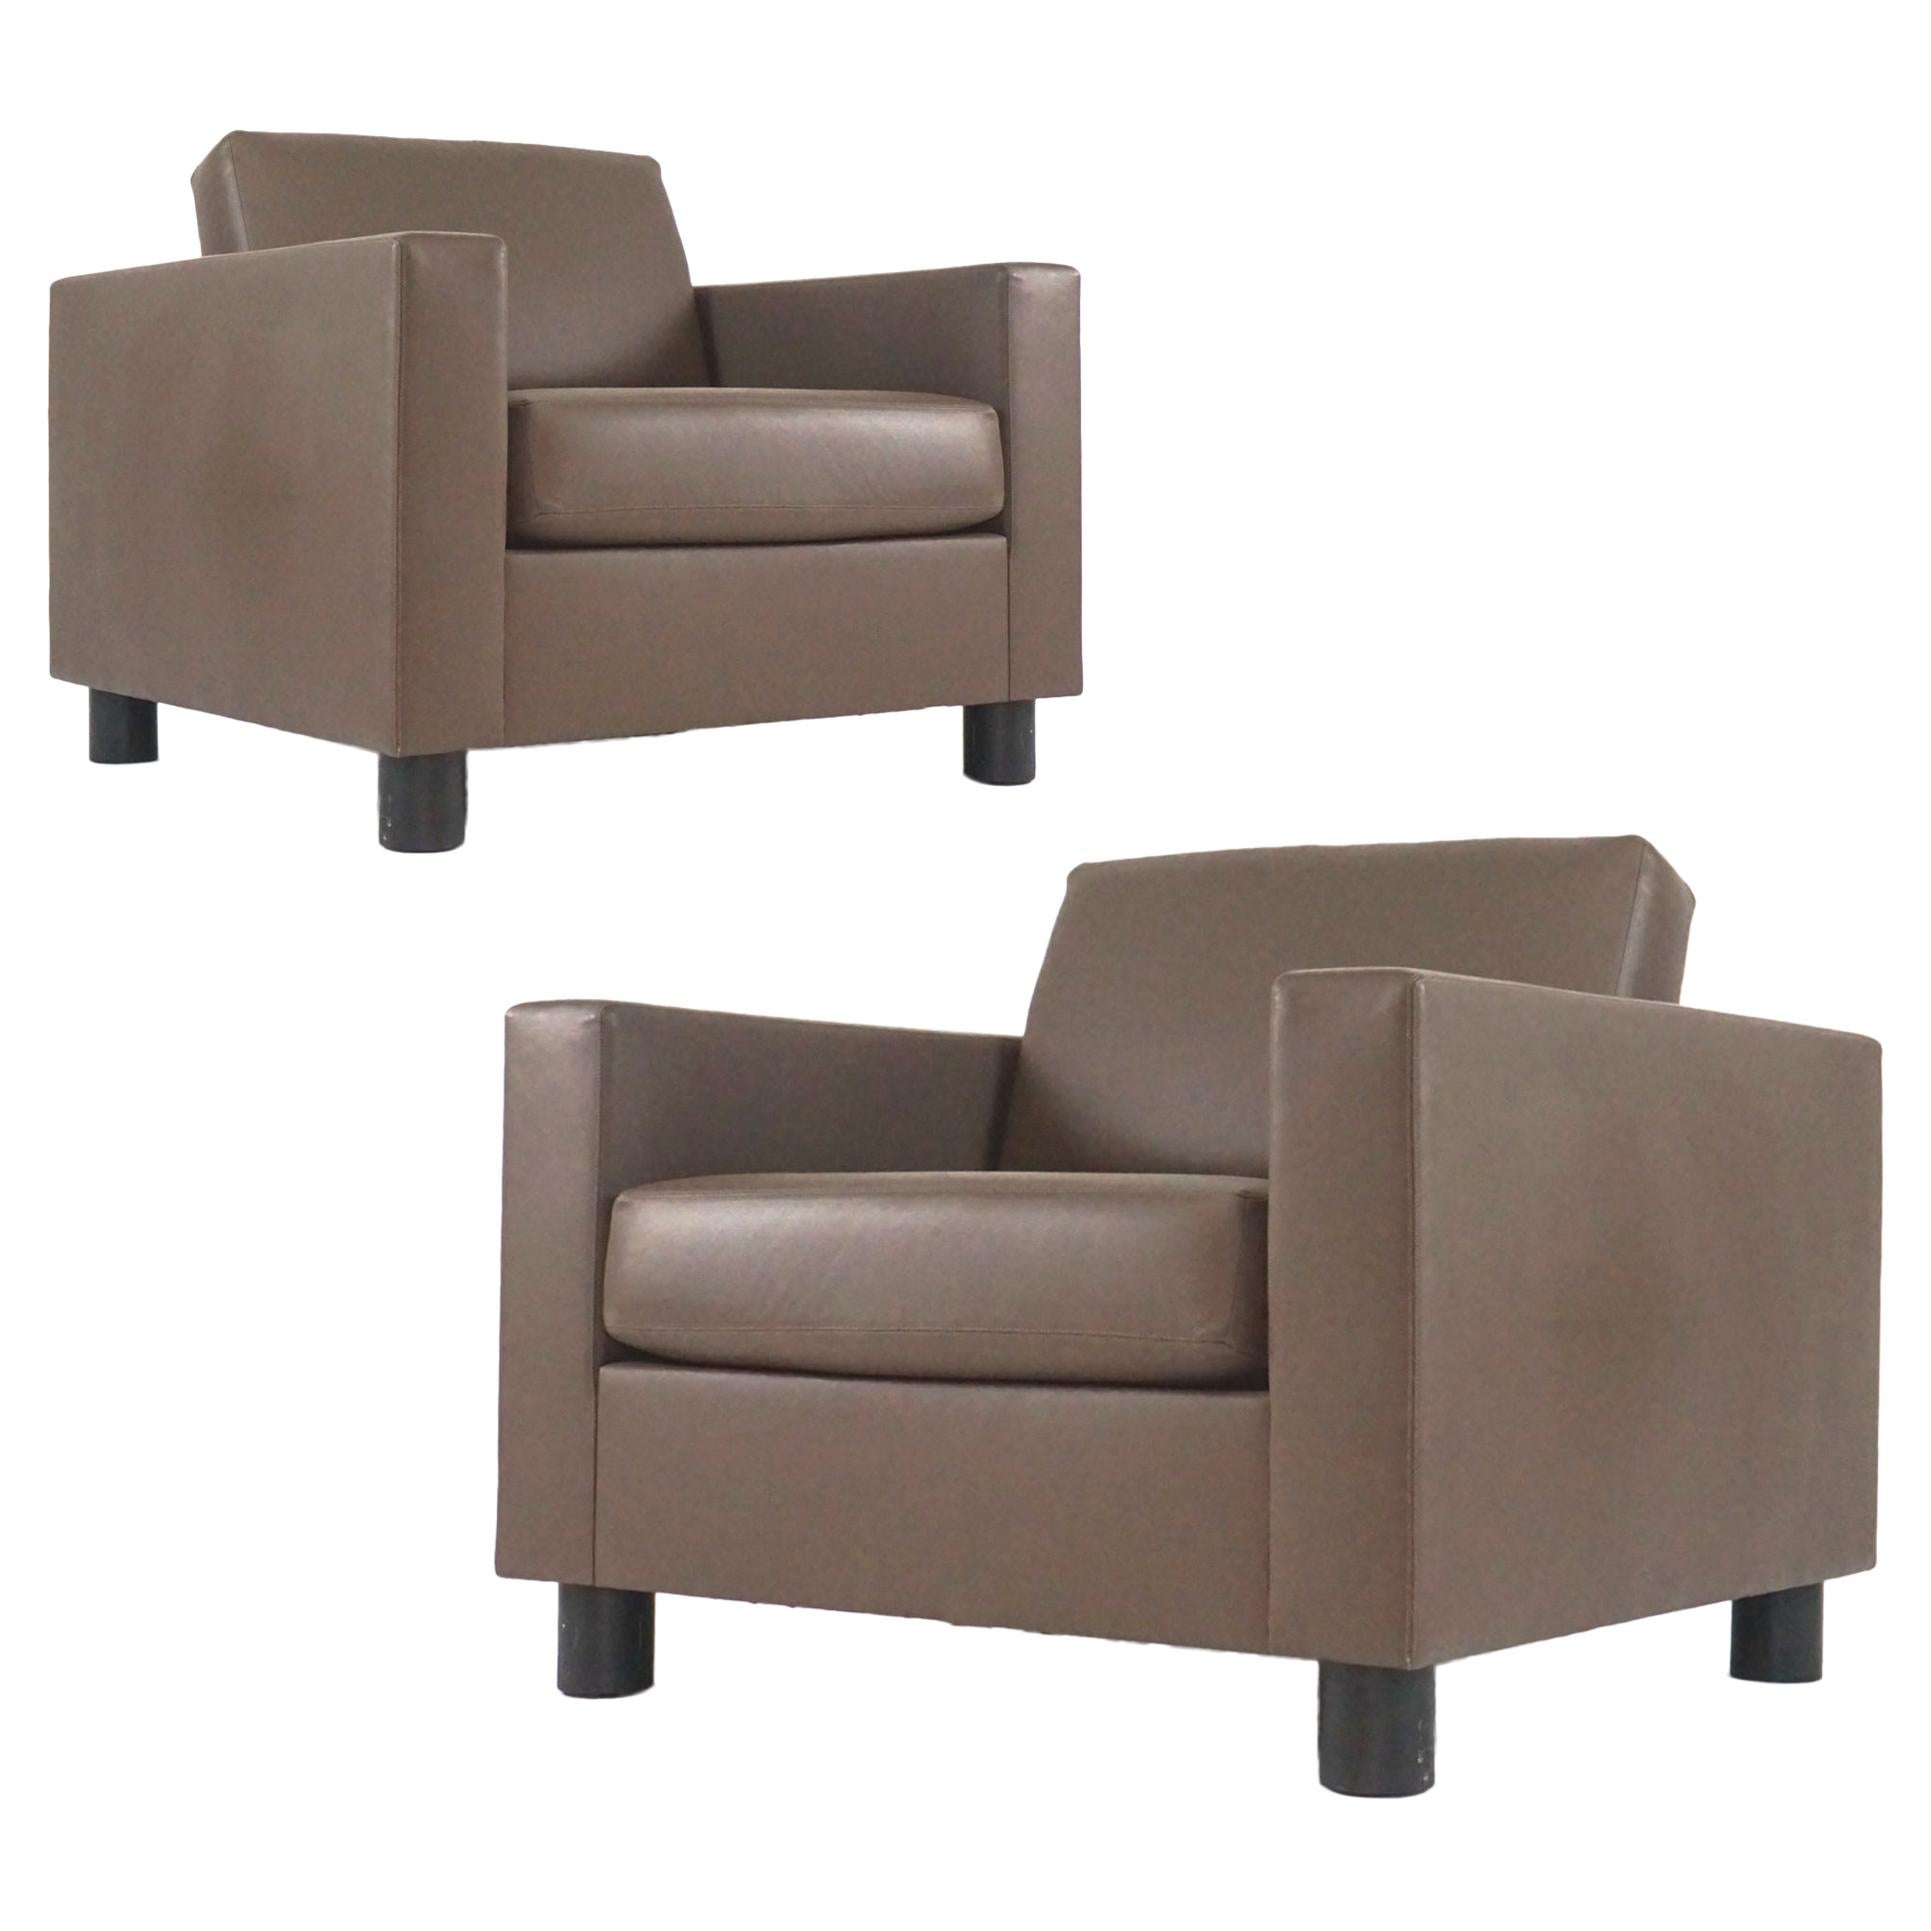 Pair Leather Shelton Mindel for Knoll SM2 Leather Club Chairs- priced per chair